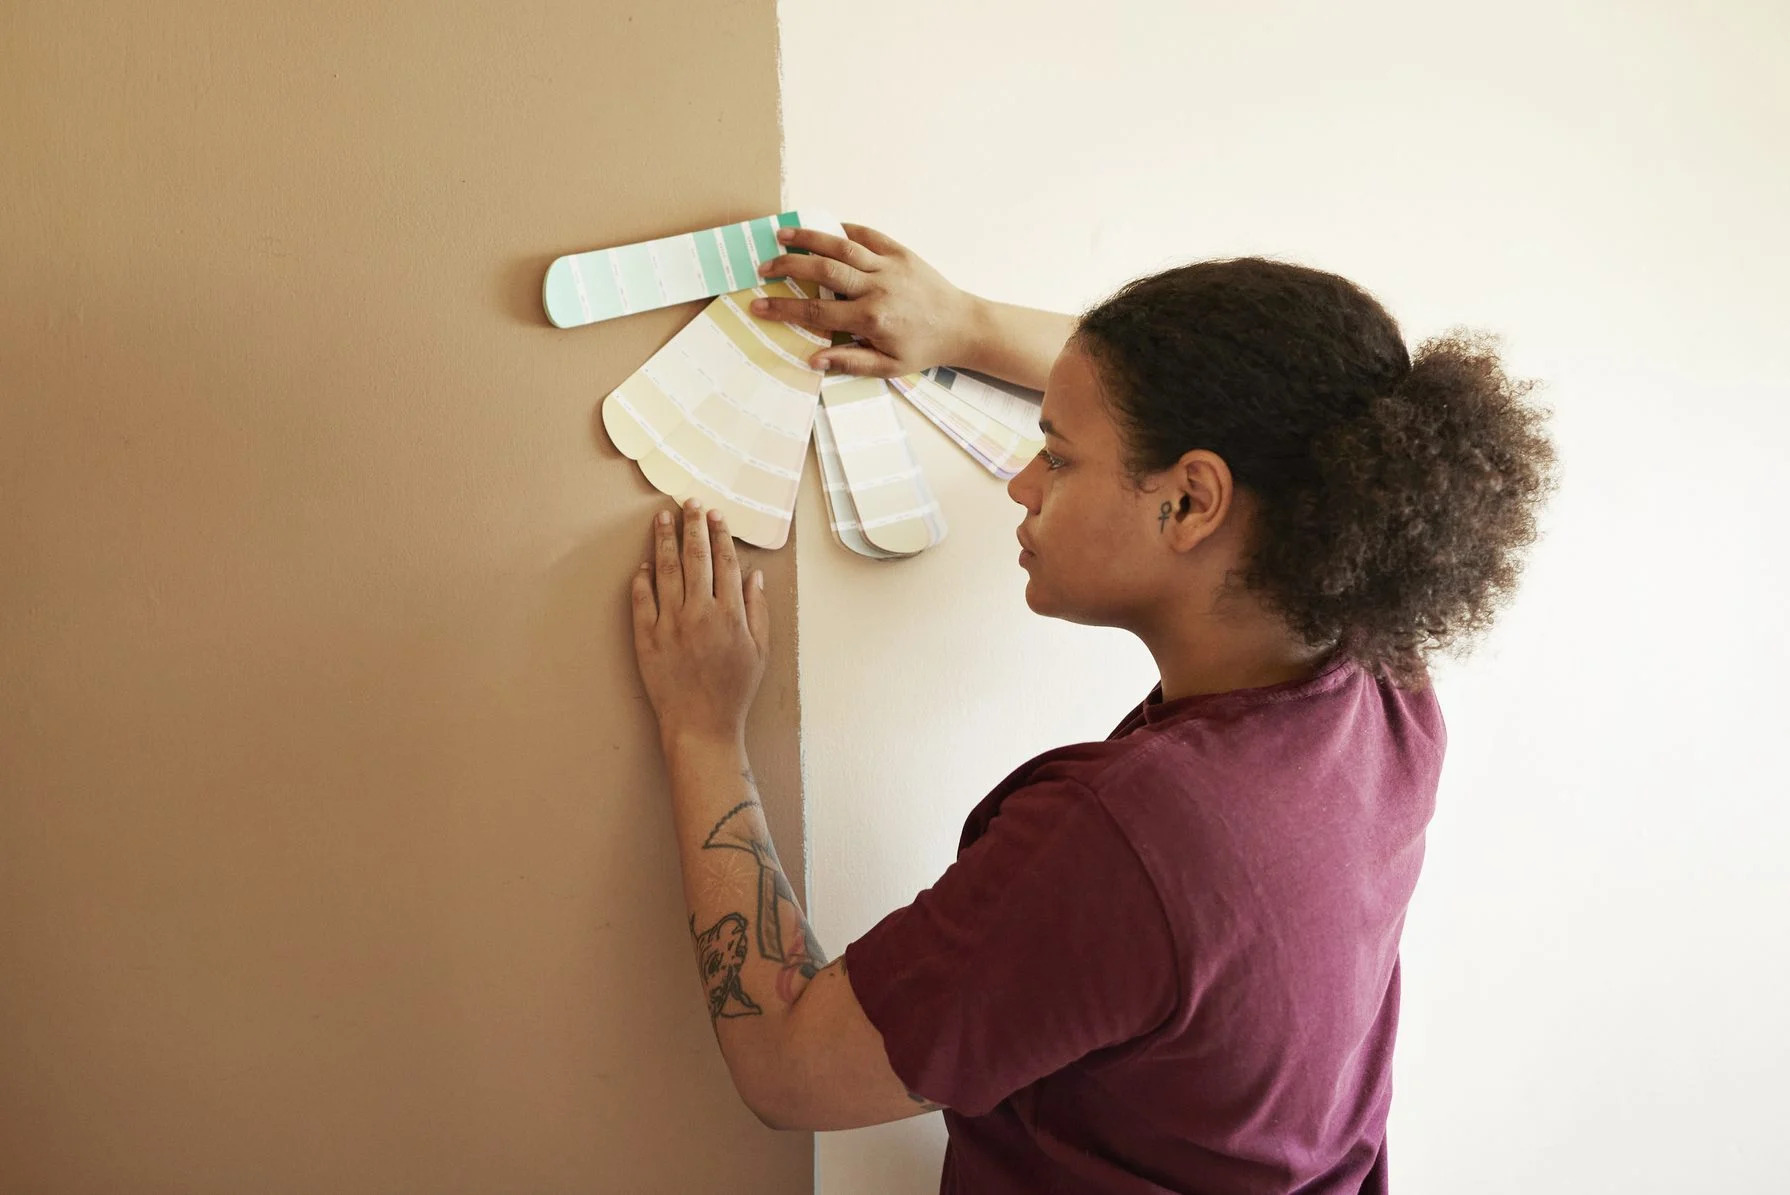 How To Match Paint Already On A Wall: Learn The Secrets From The Experts